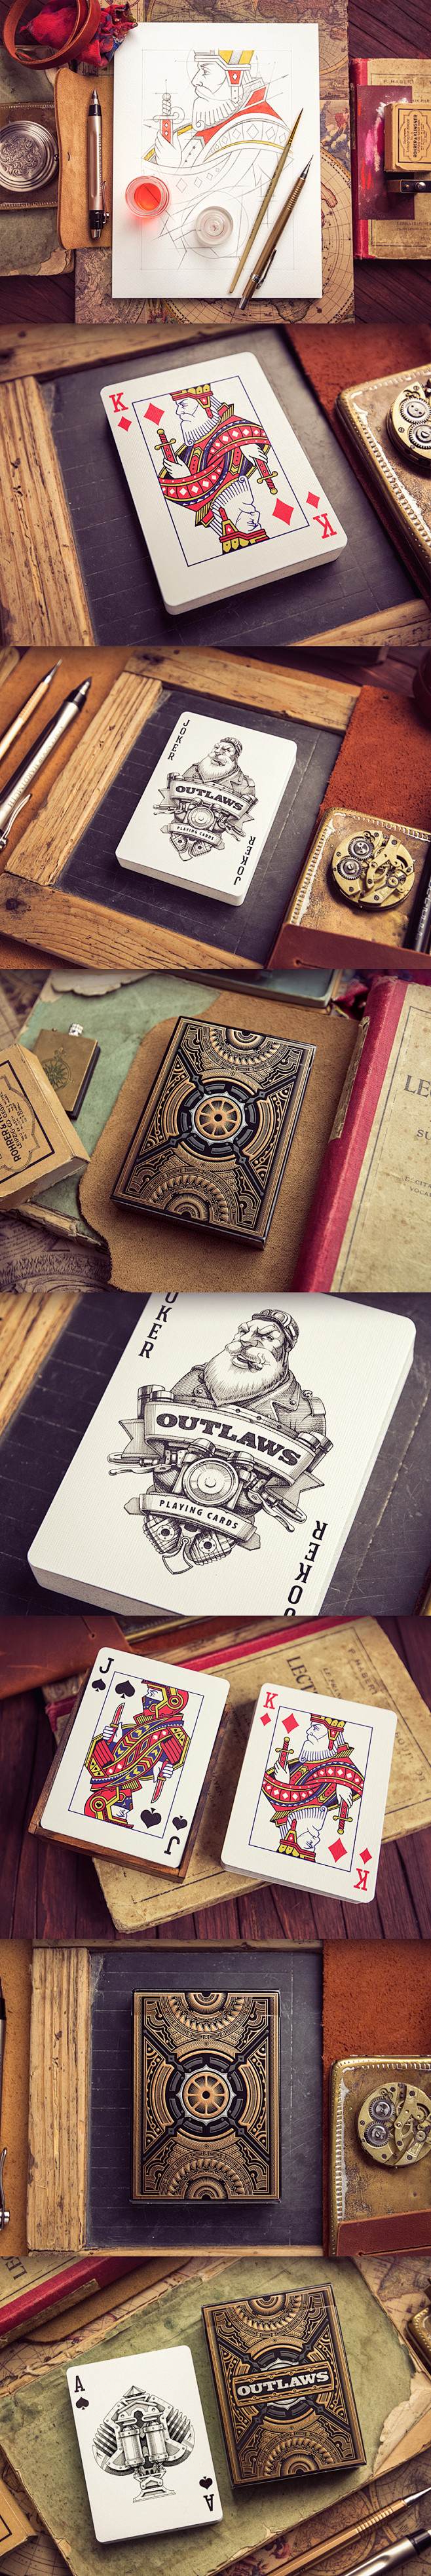 Playing cards outlaw...